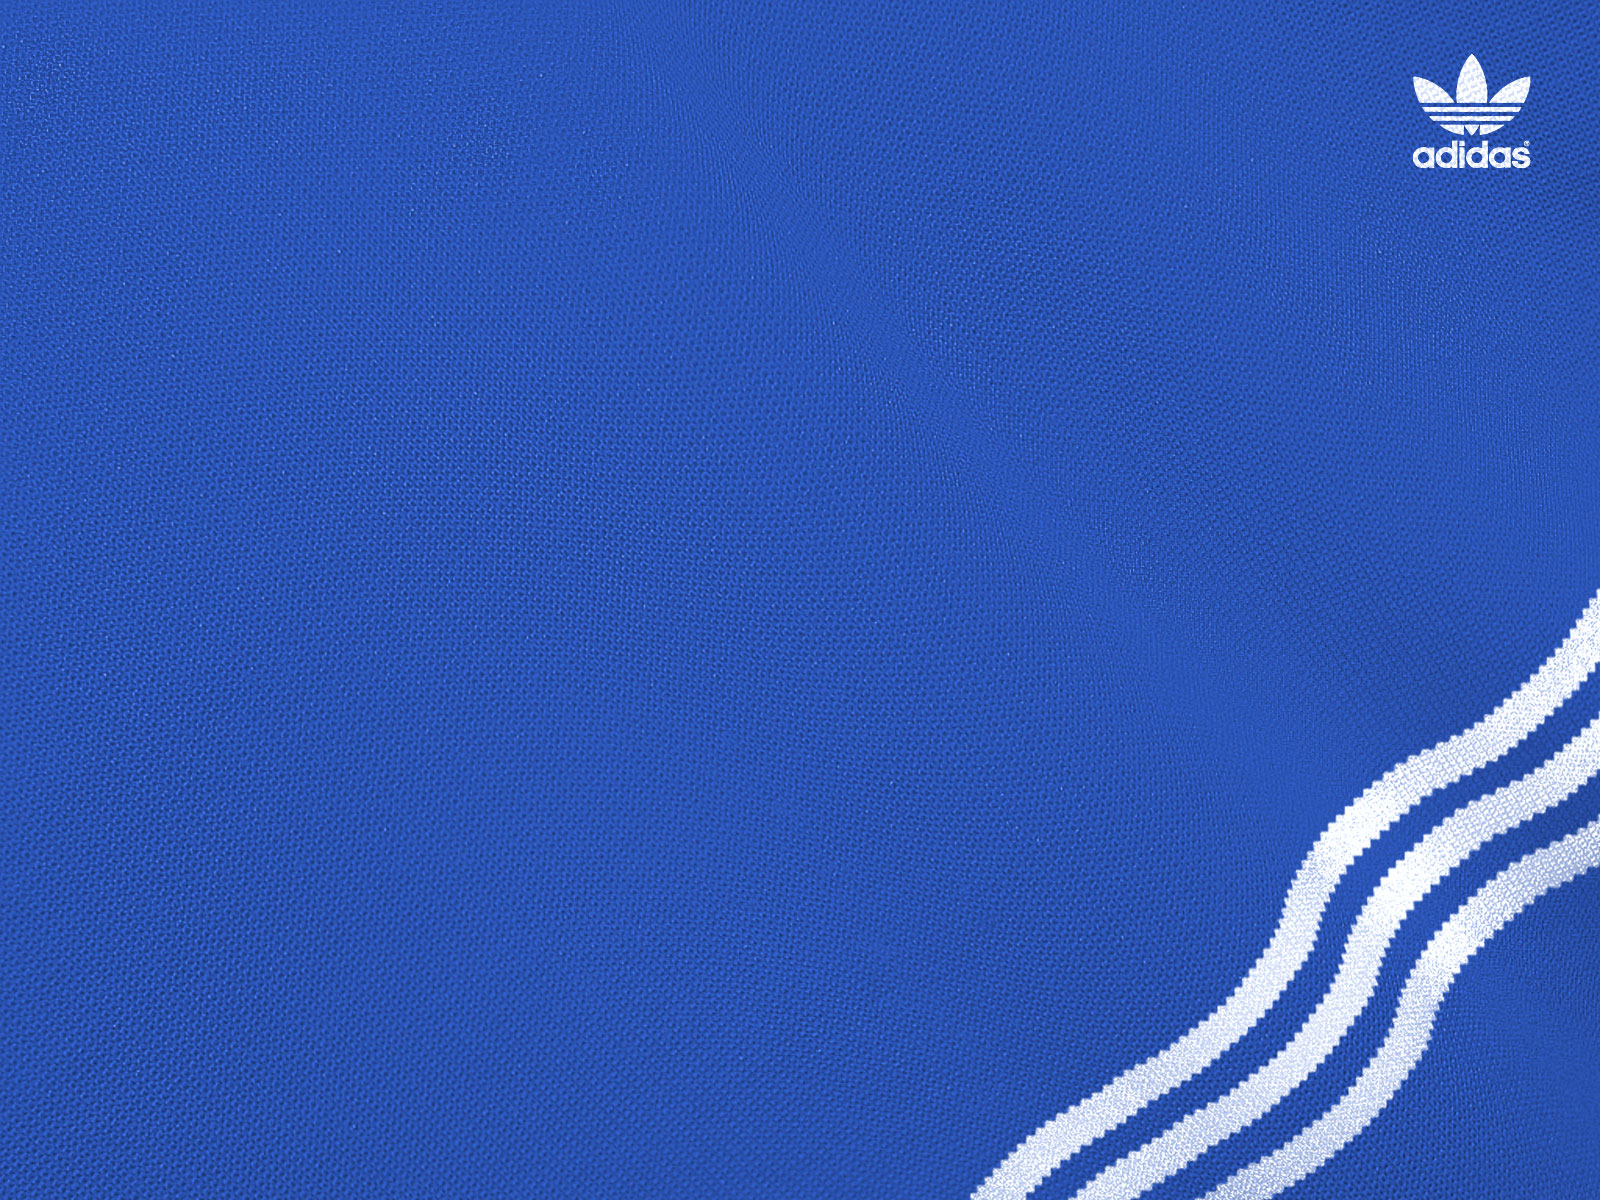 Free download Adidas blue wallpapers and images wallpapers pictures photos  [1600x1200] for your Desktop, Mobile & Tablet | Explore 49+ Adidas  Wallpapers for Desktop | Adidas 2015 Wallpaper, Adidas Wallpapers, Adidas  Wallpaper